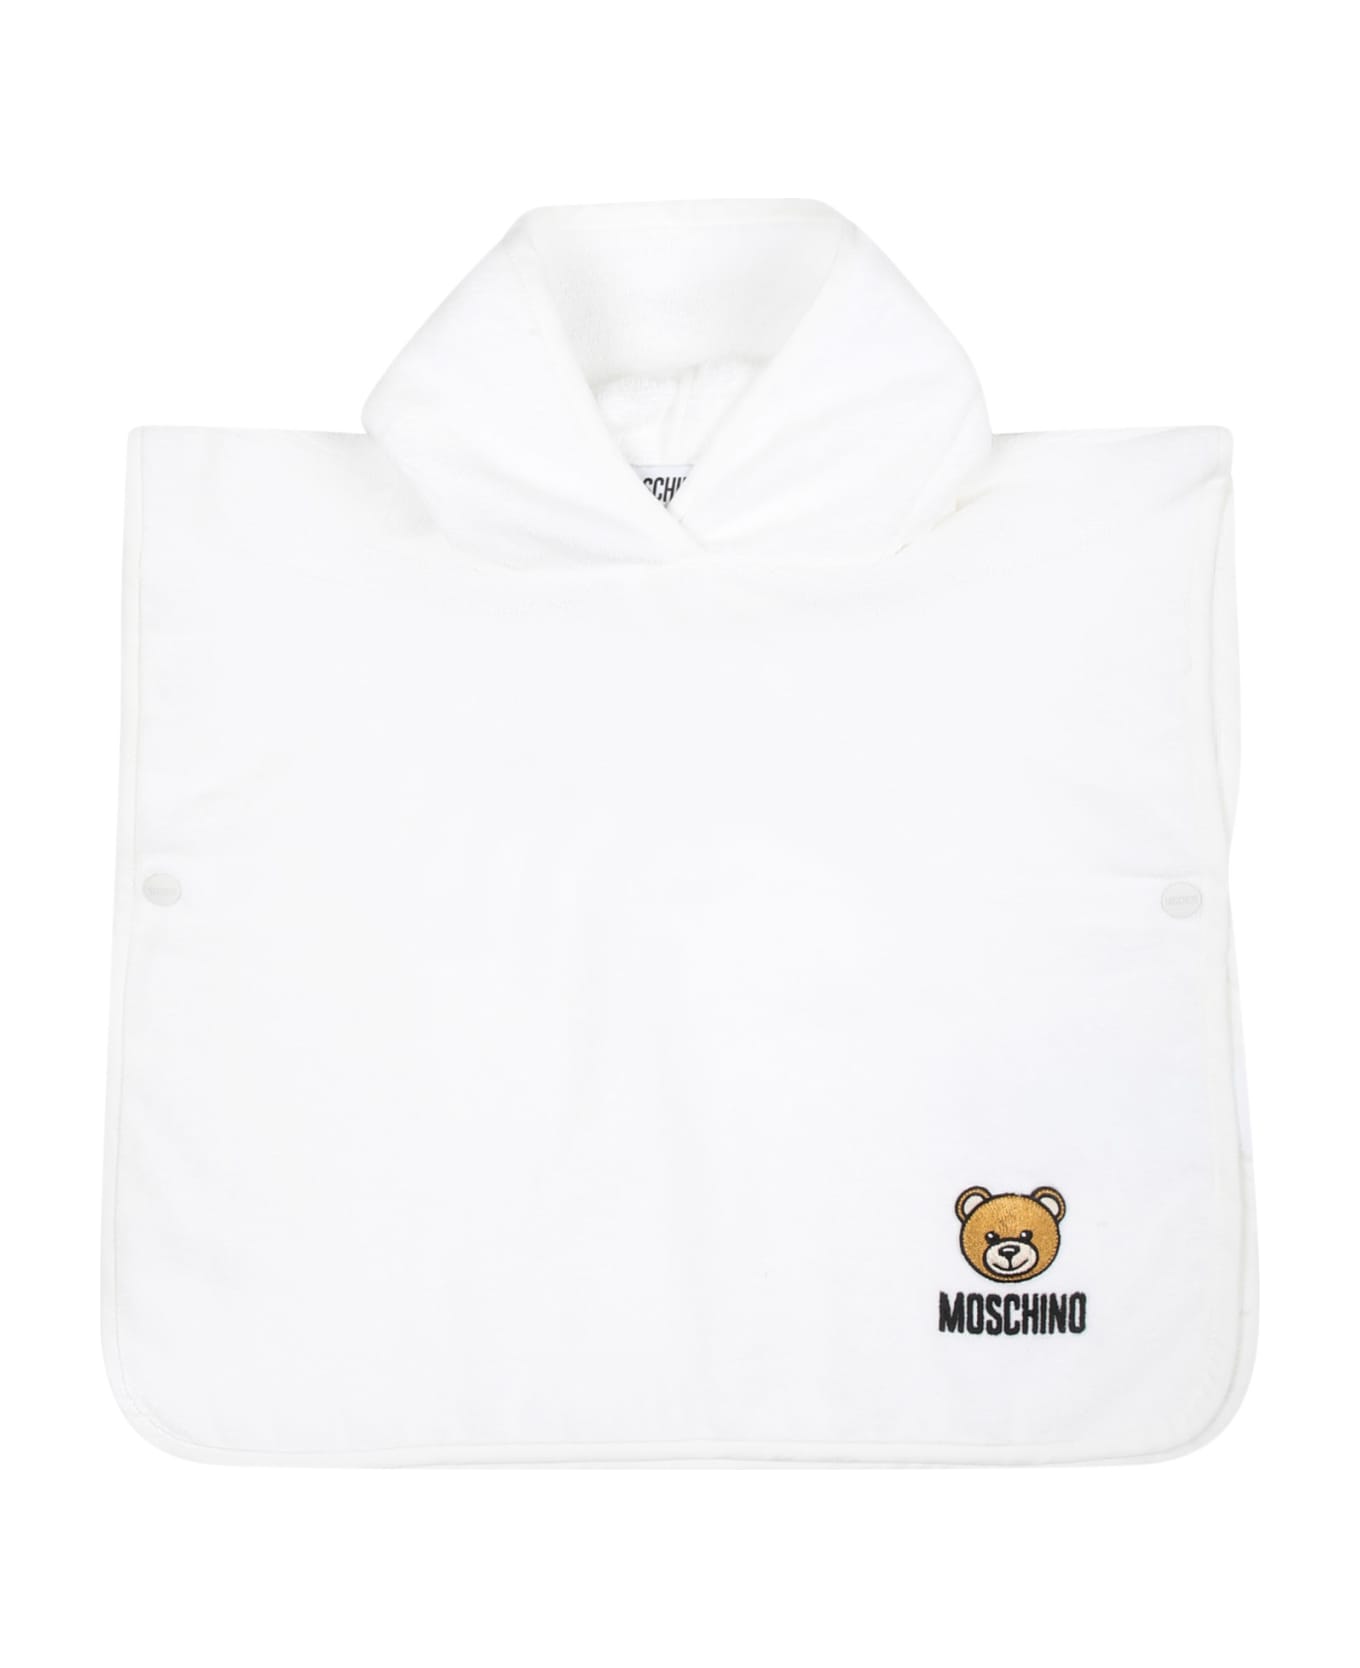 Moschino White Bathrobe For Baby Kids With Teddy Bear - White アクセサリー＆ギフト